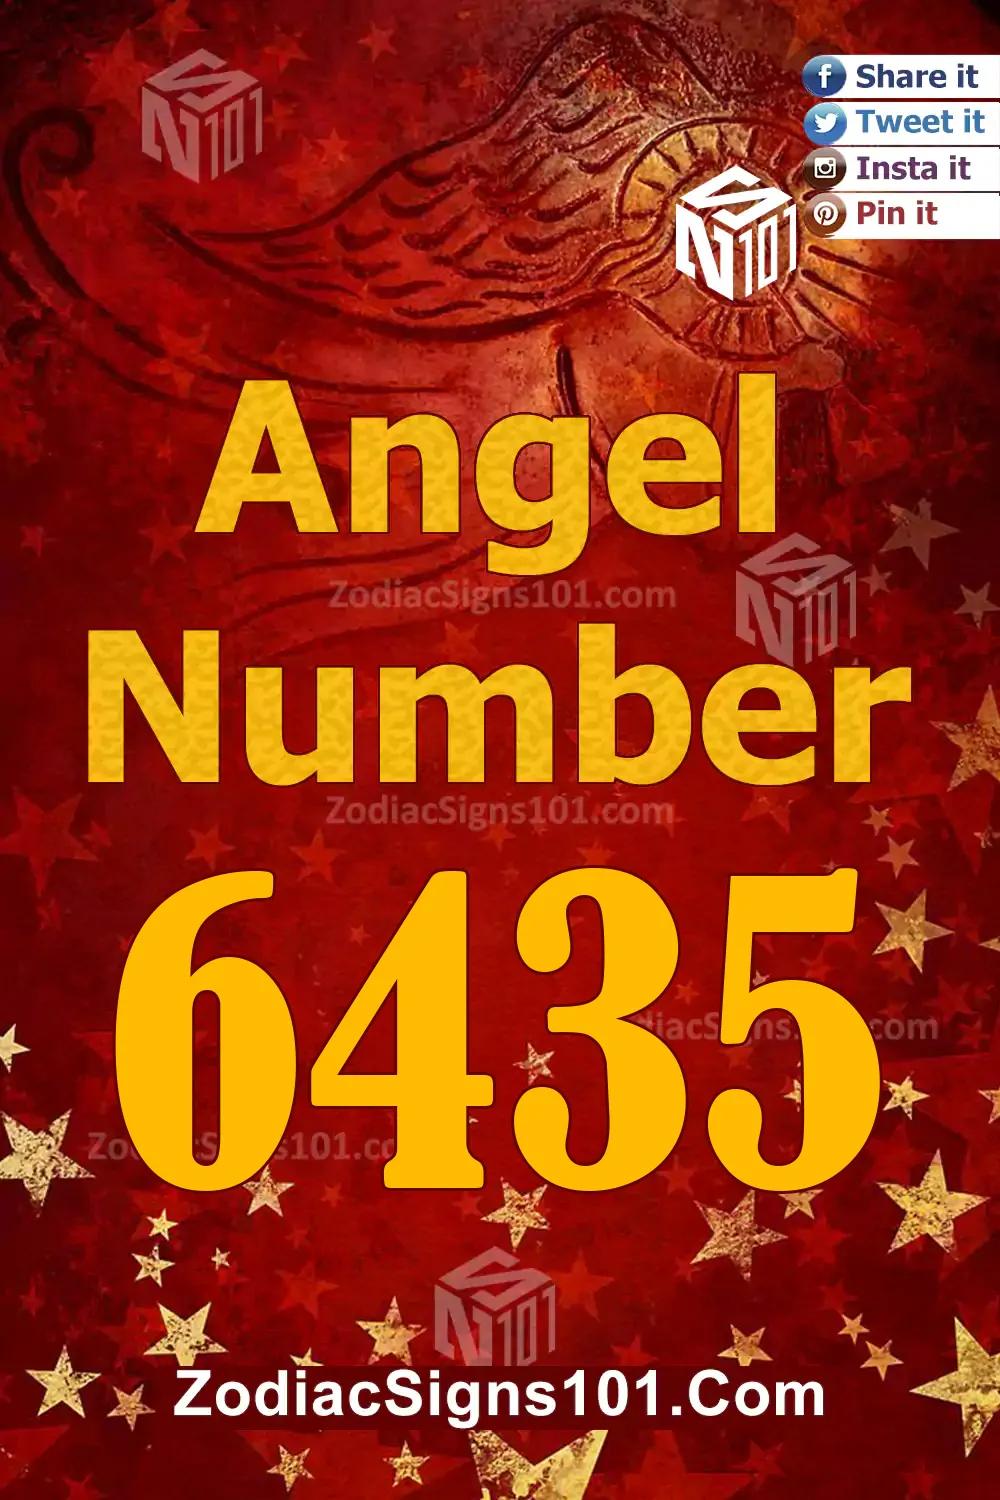 6435 Angel Number Meaning